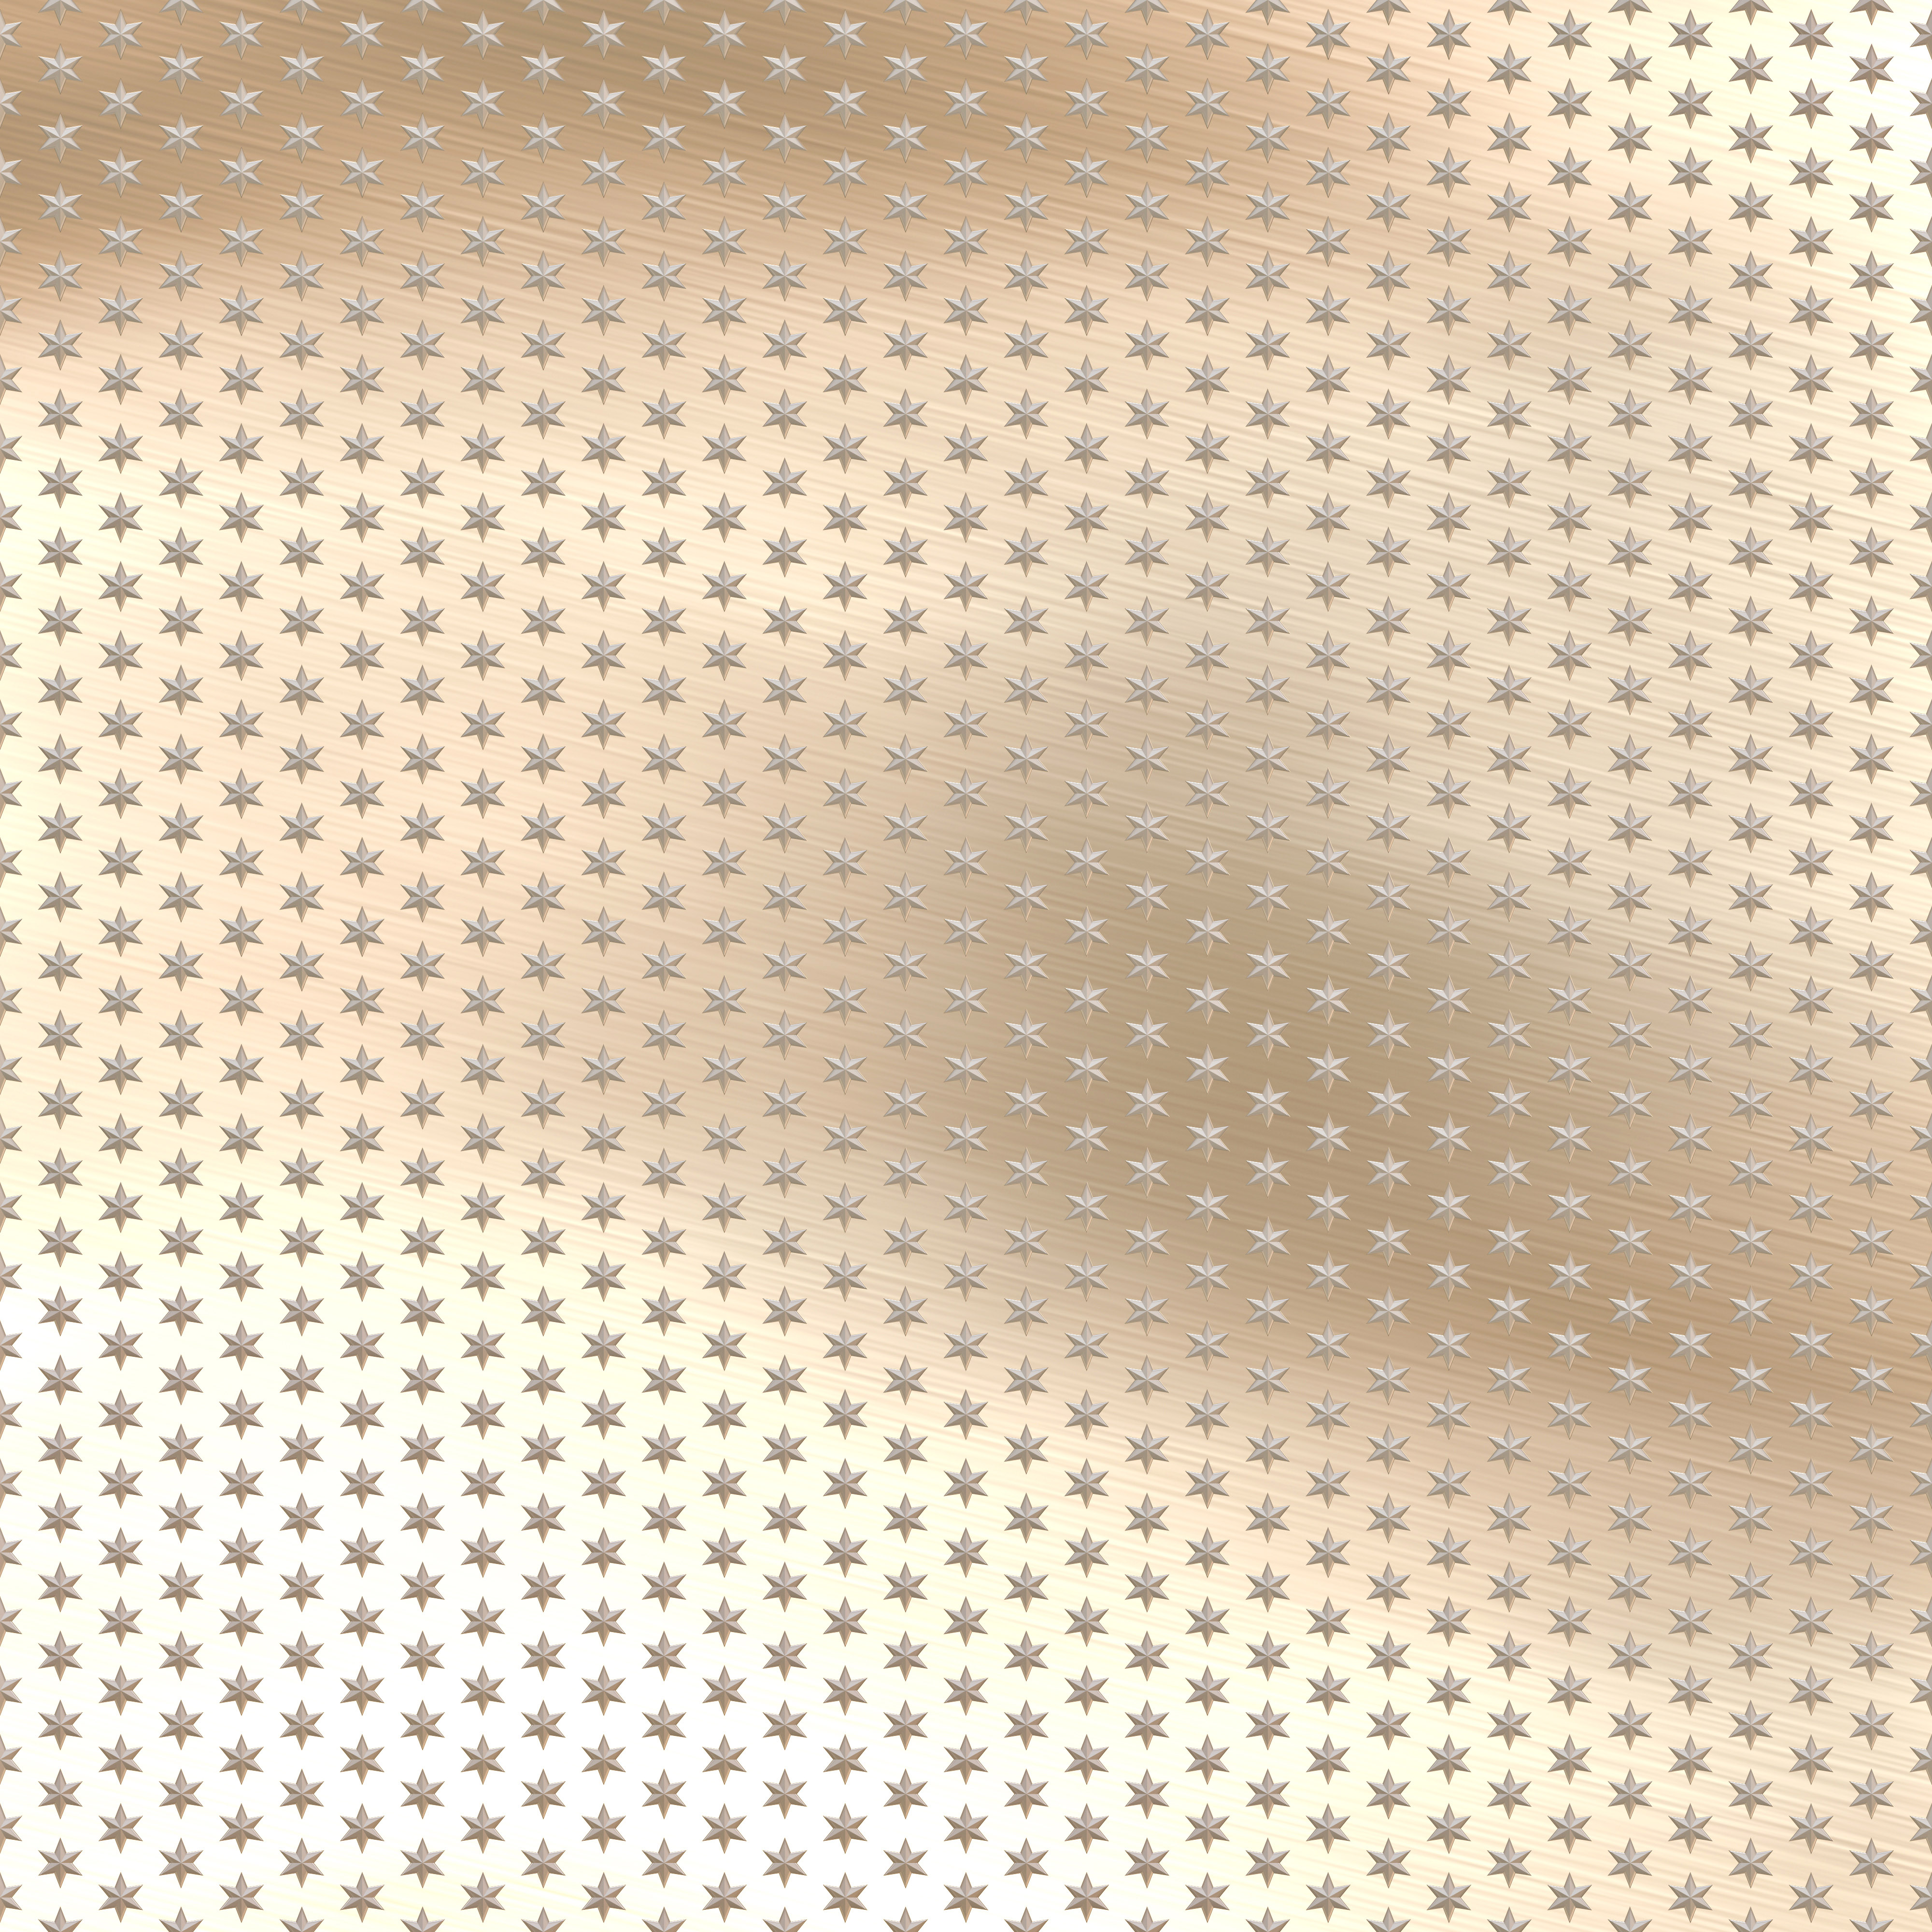 Shiny metal texture with gold accents hd background